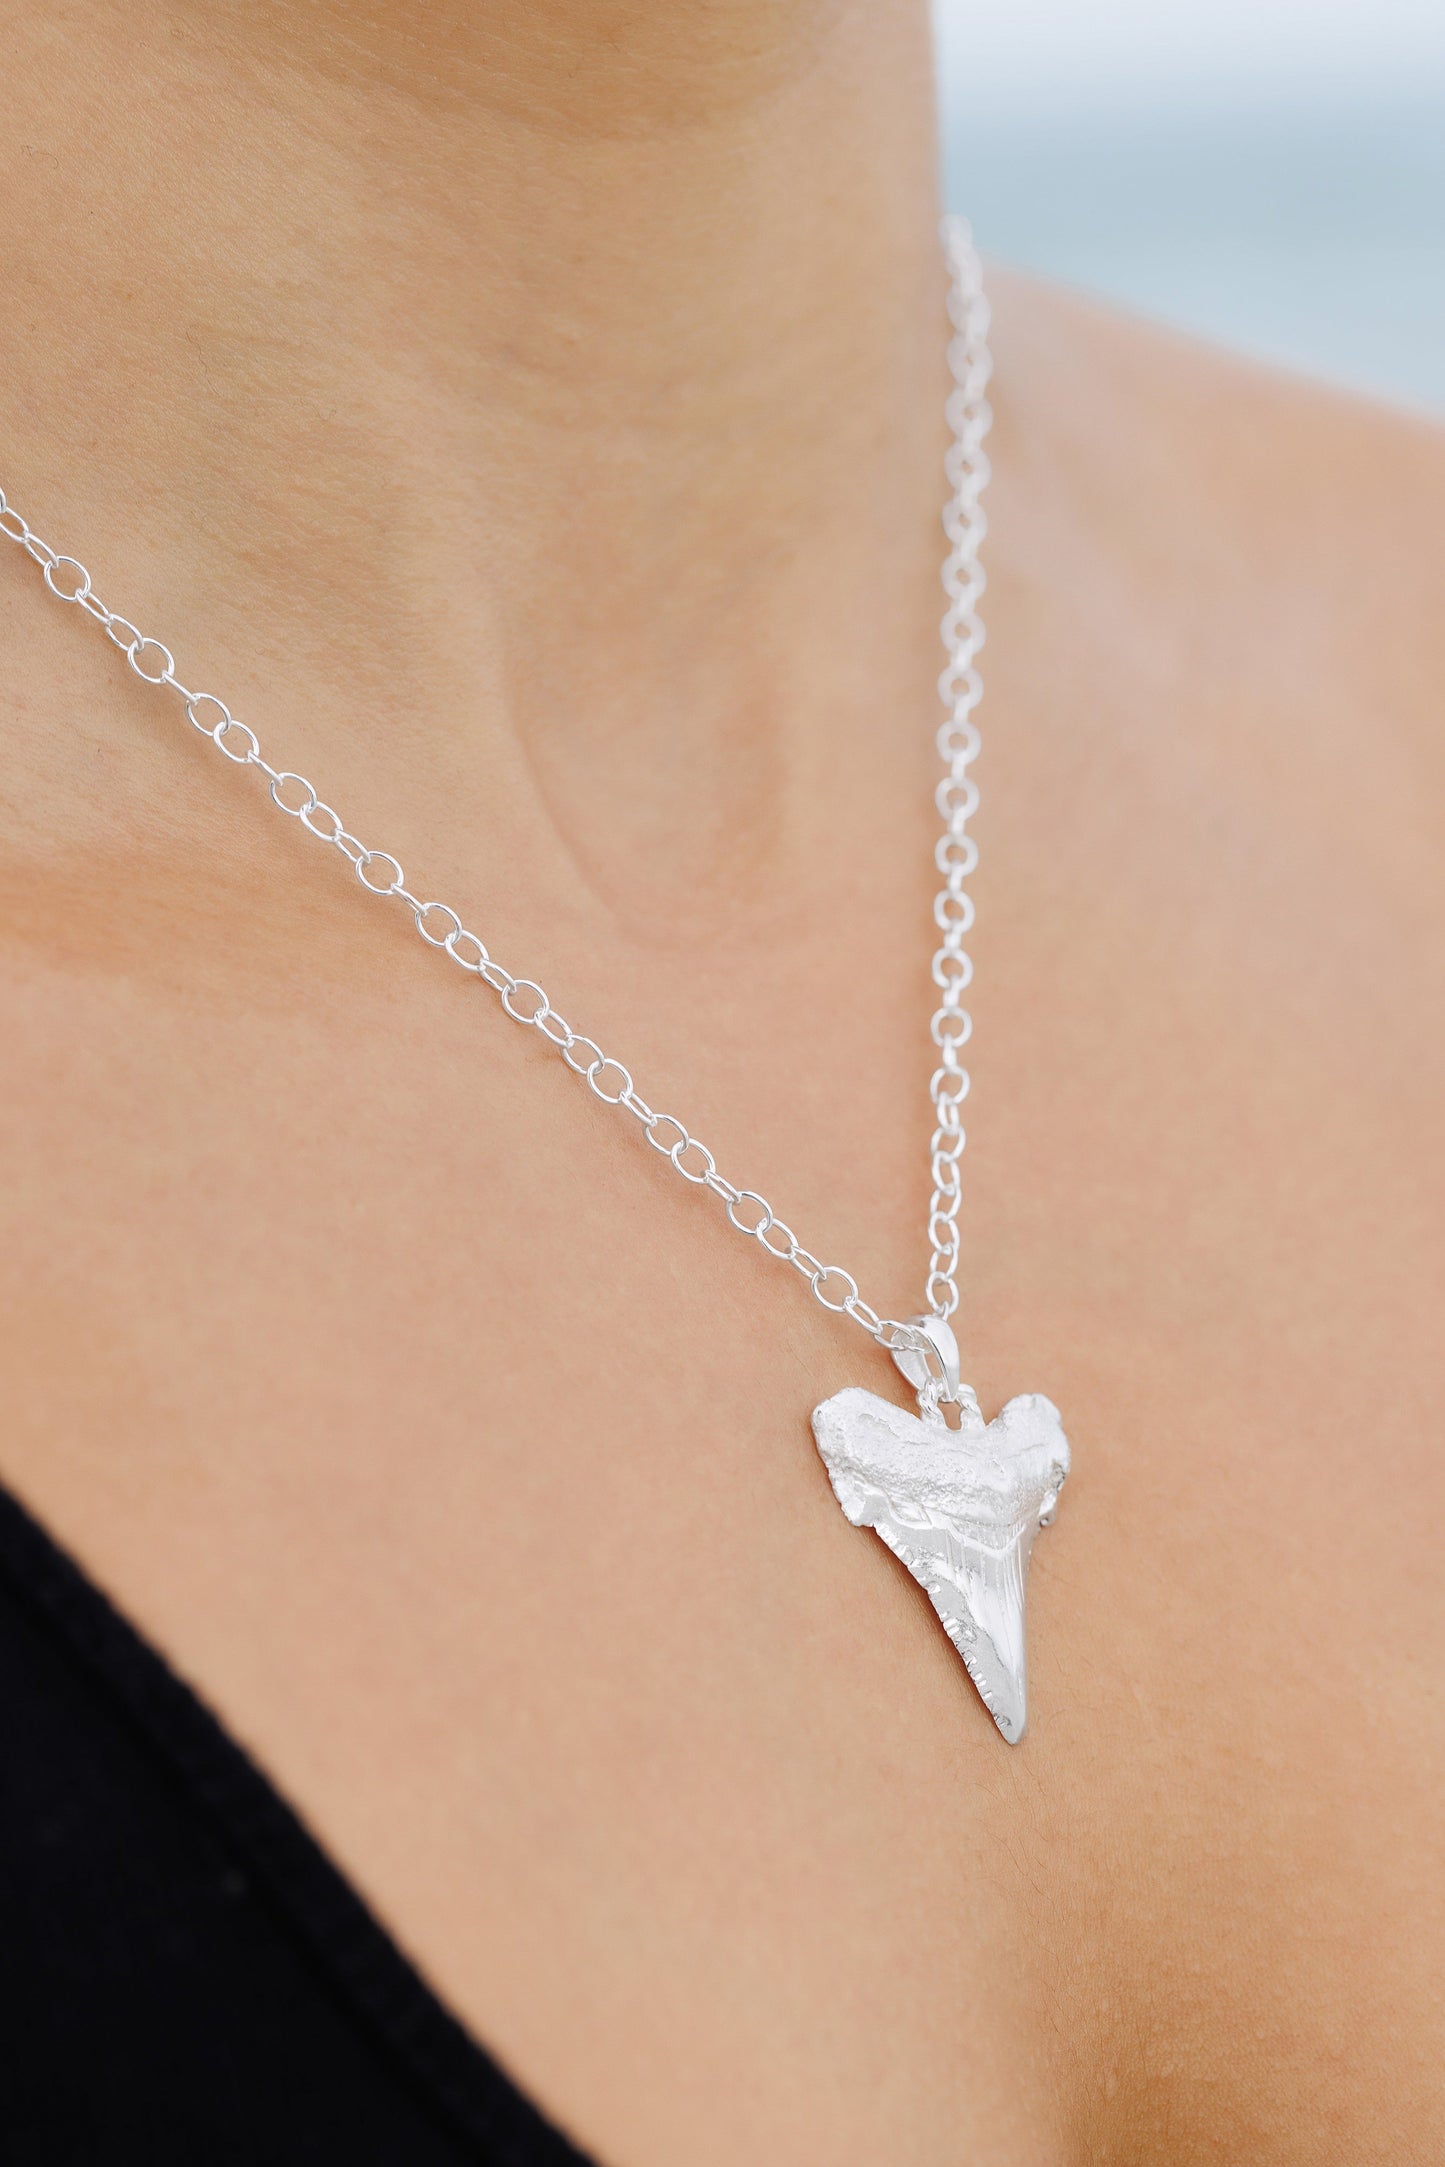 Medium Sterling Silver Sharks Tooth 18" Necklace